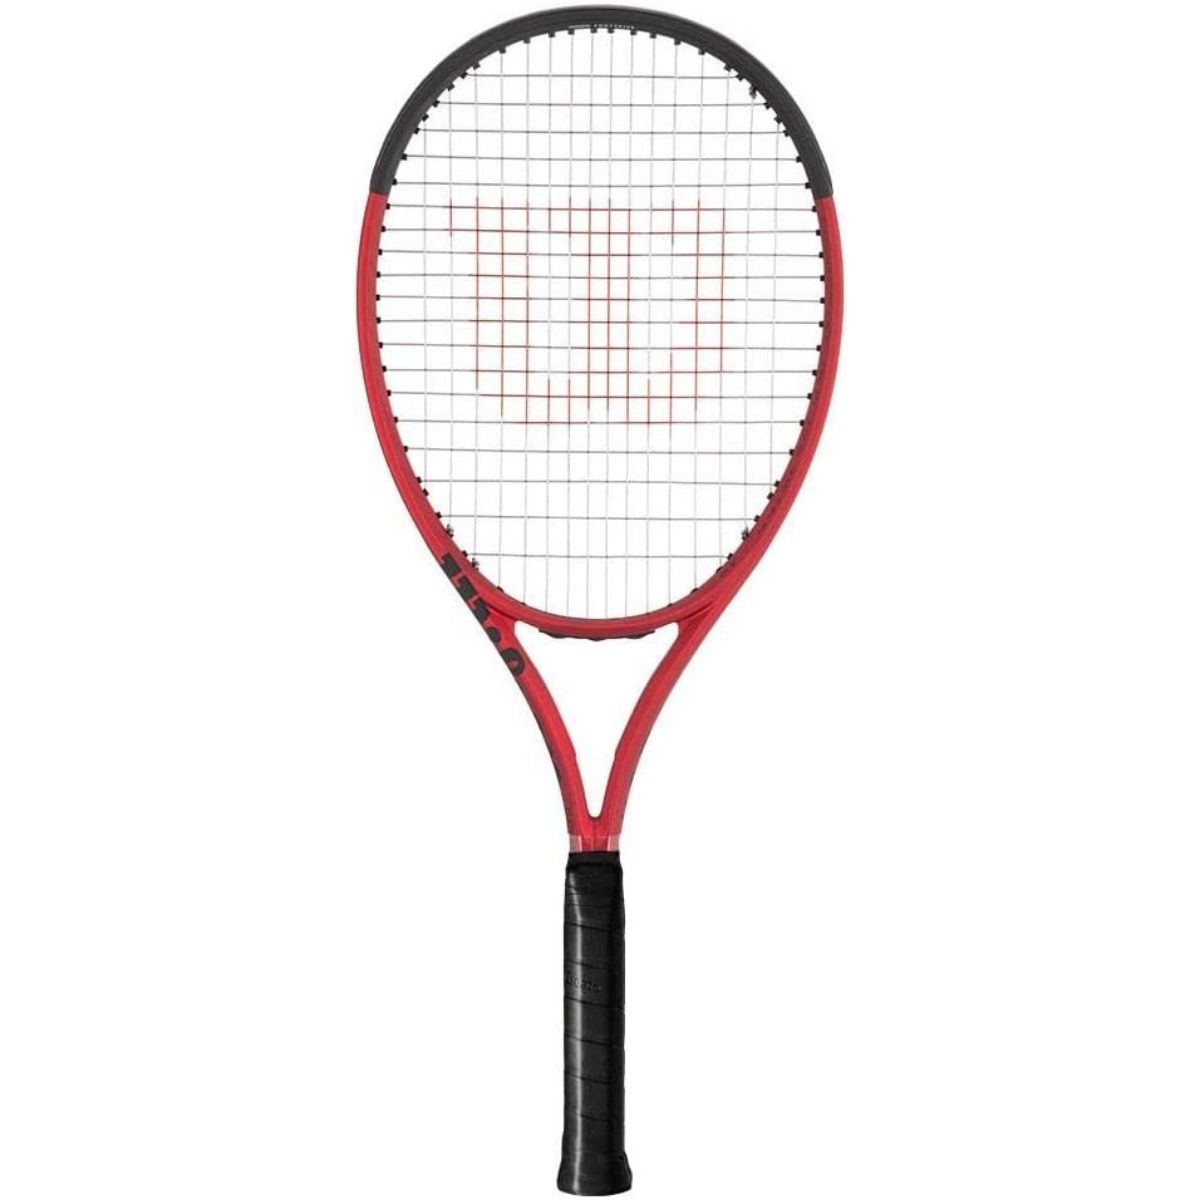 The Best Tennis Rackets for Beginners Options: Wilson Clash 108 v2